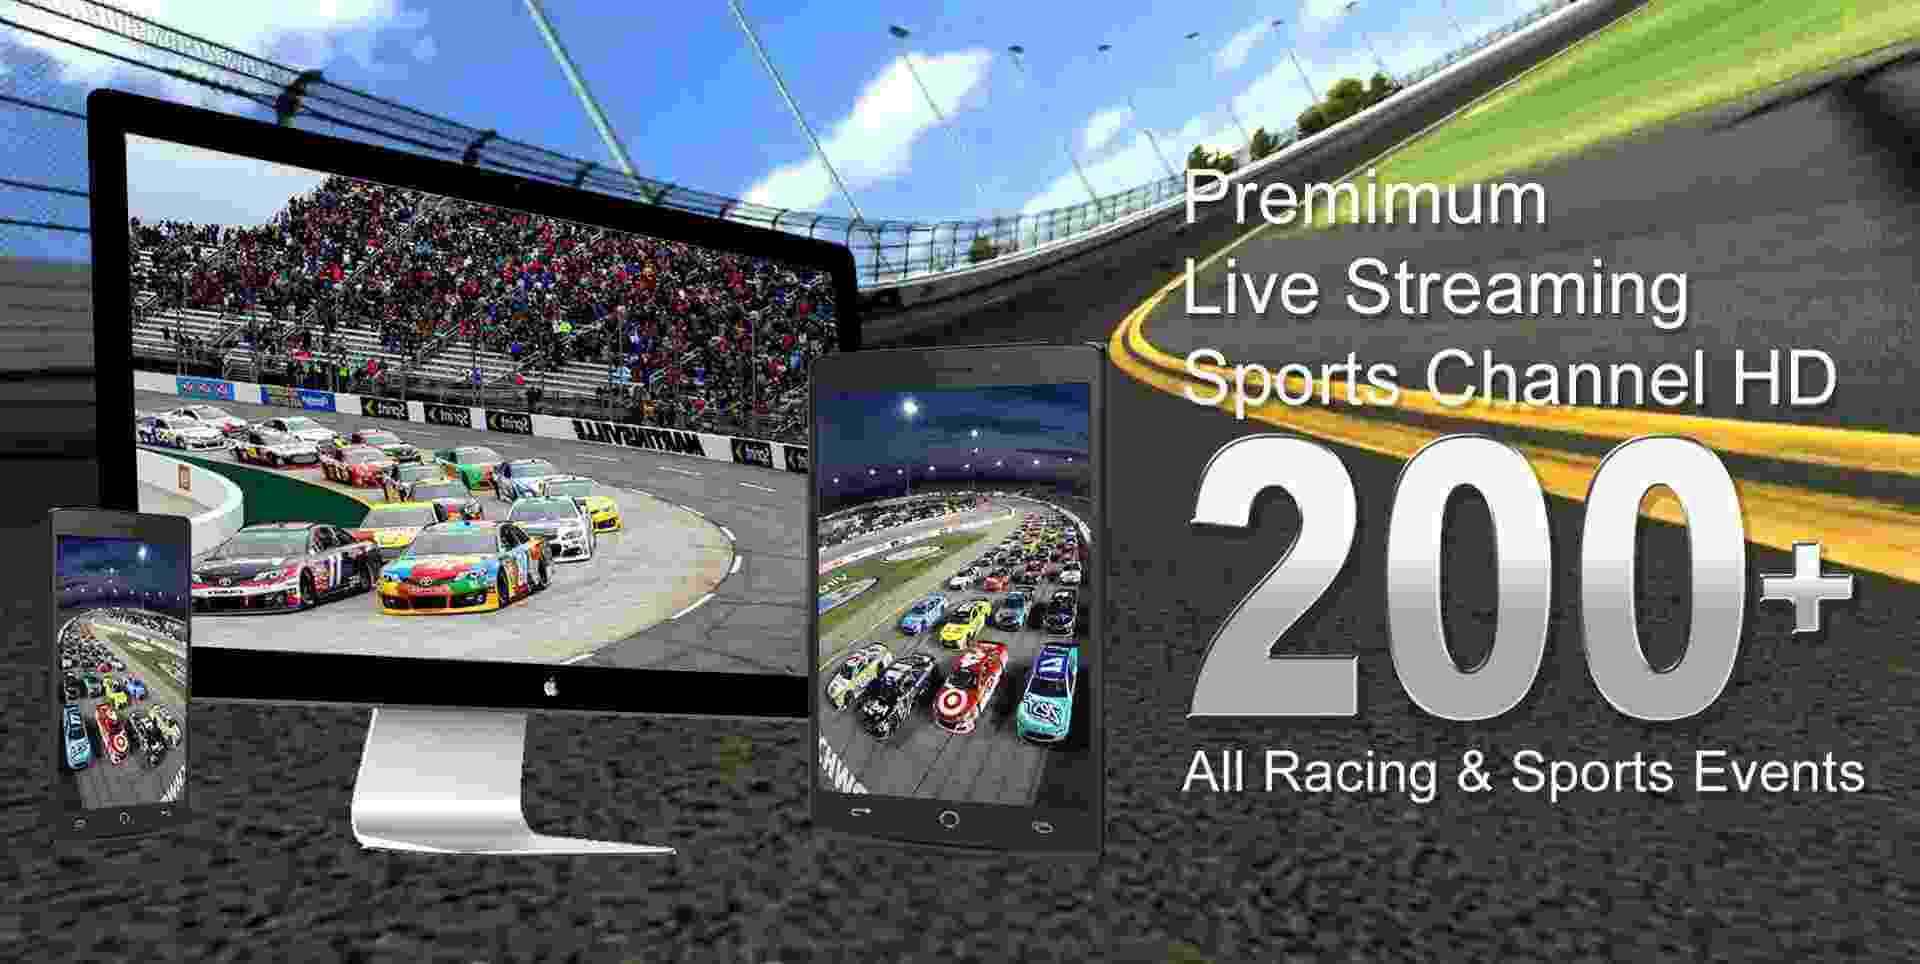 Sprint Cup series New Hampshire 301 streaming